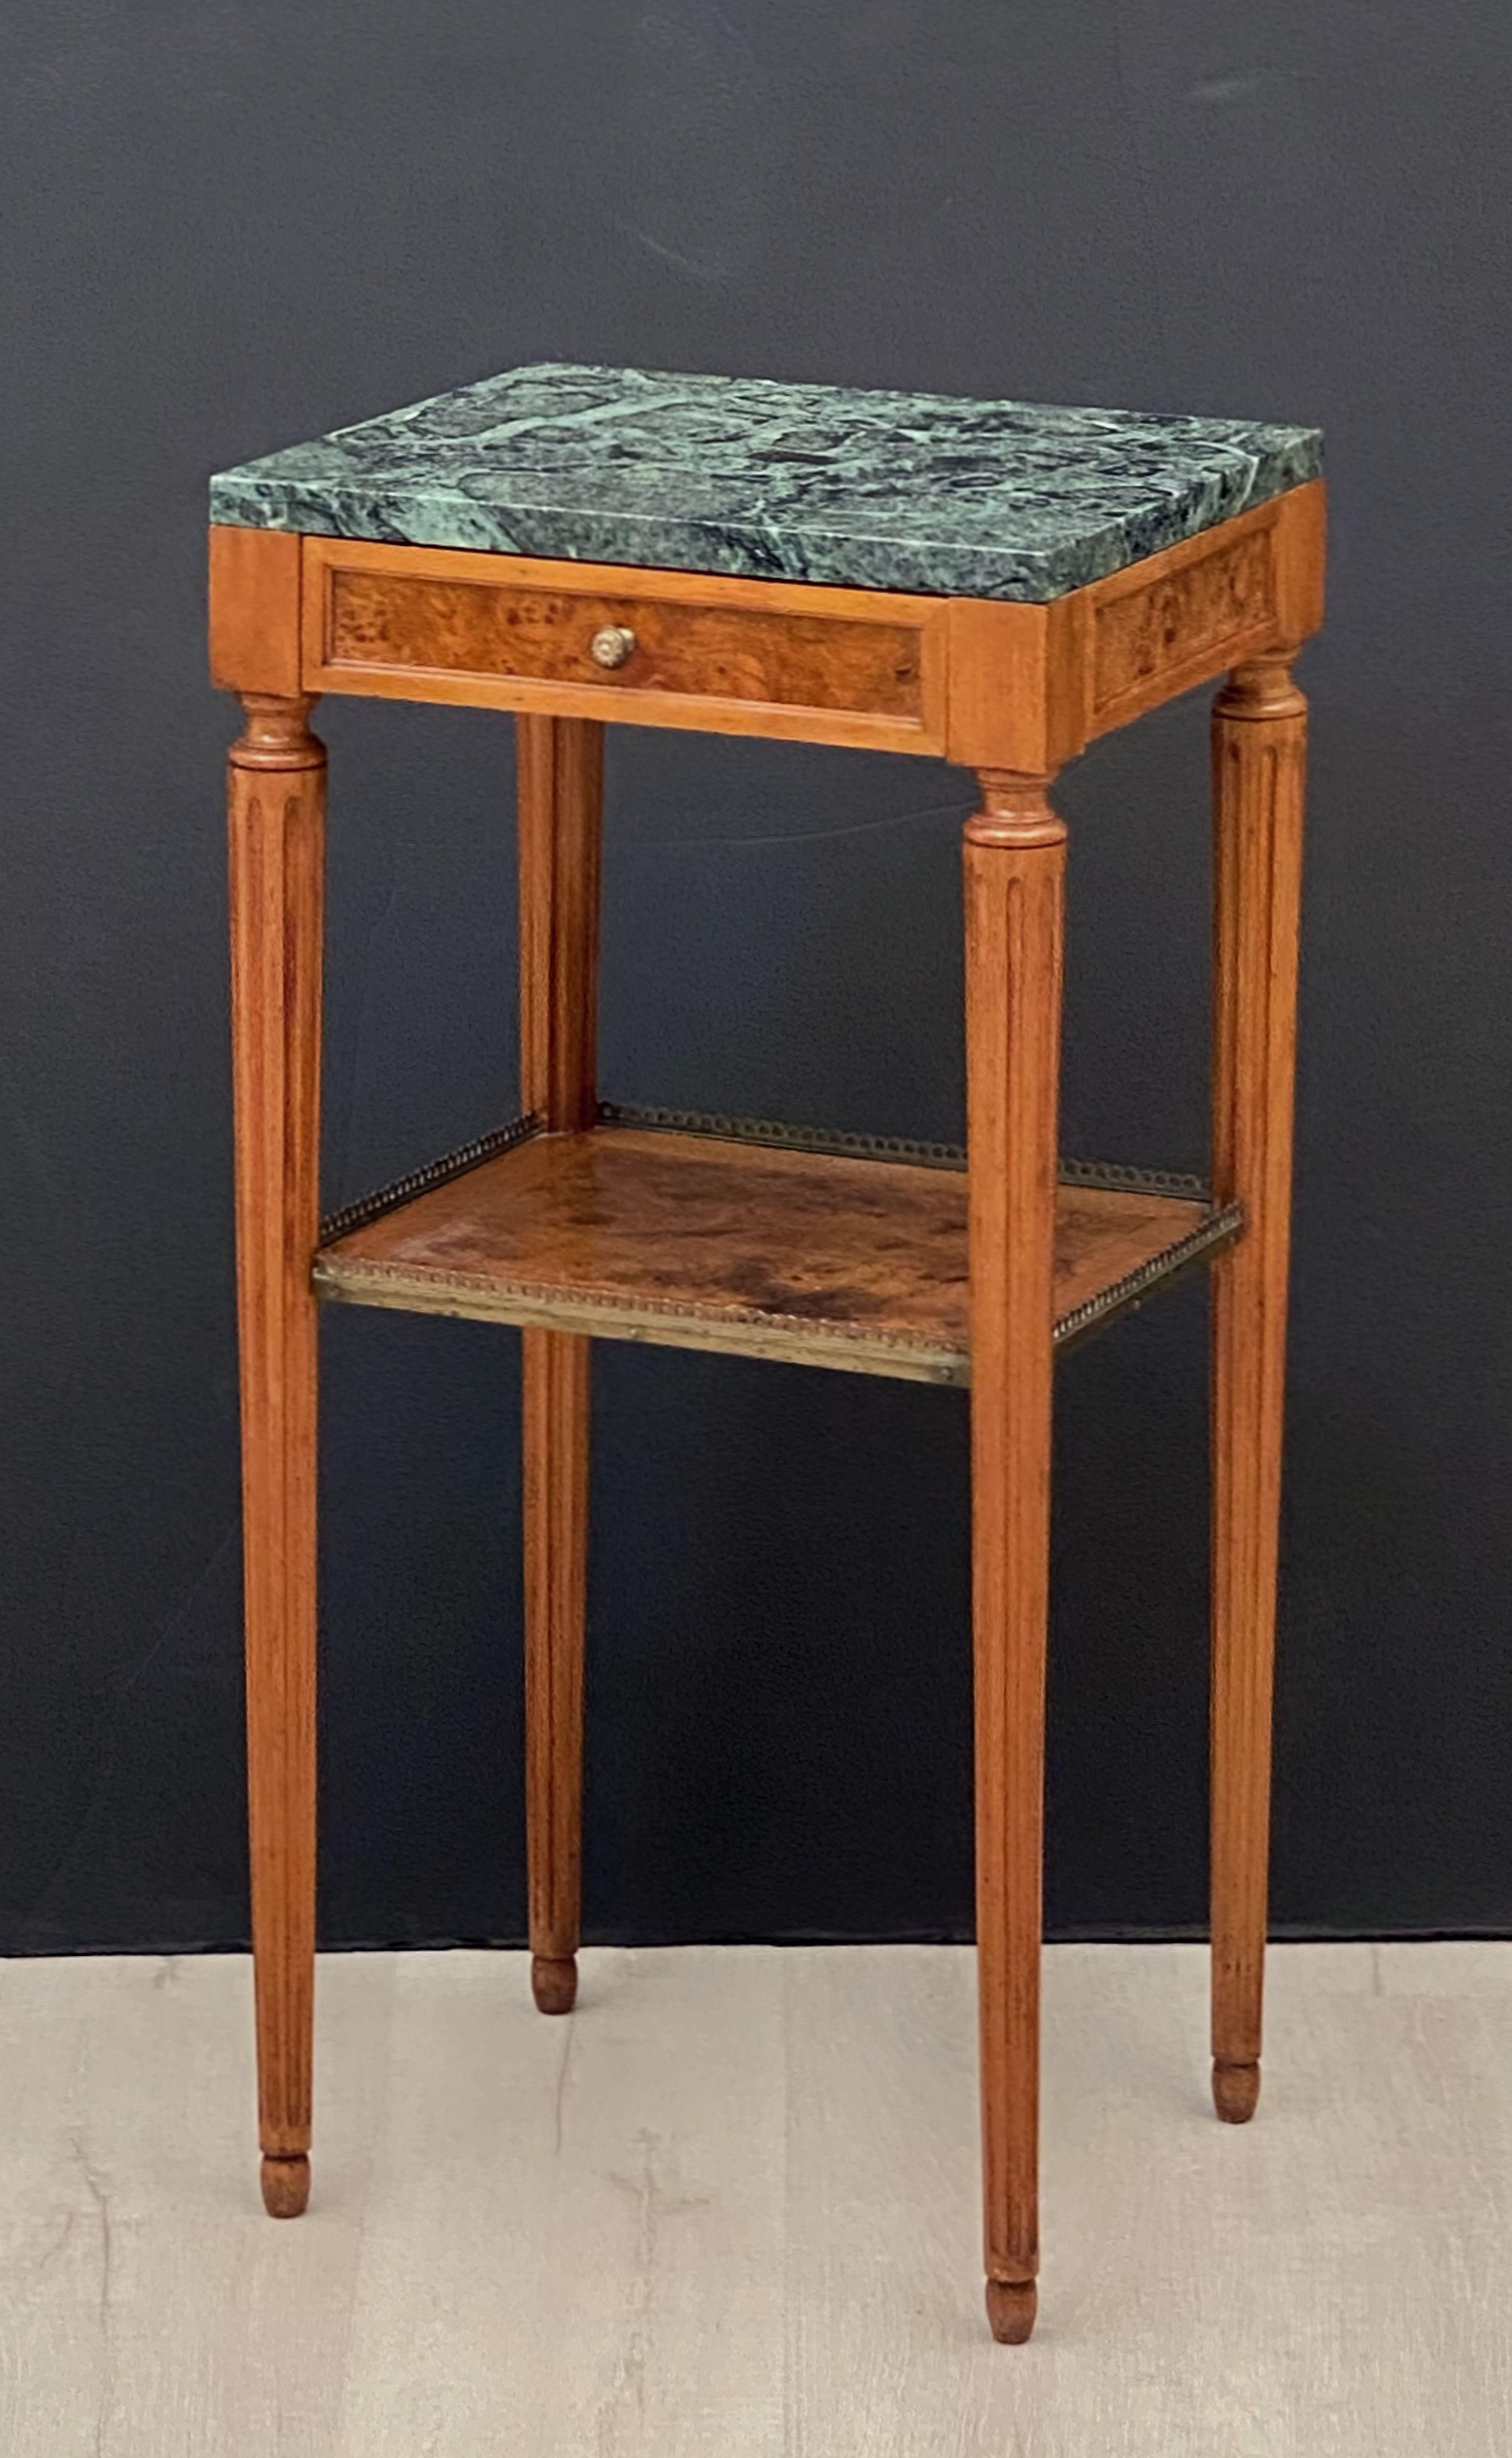 Metal French Nightstands or Bedside Tables with Marble Tops, Individually Priced